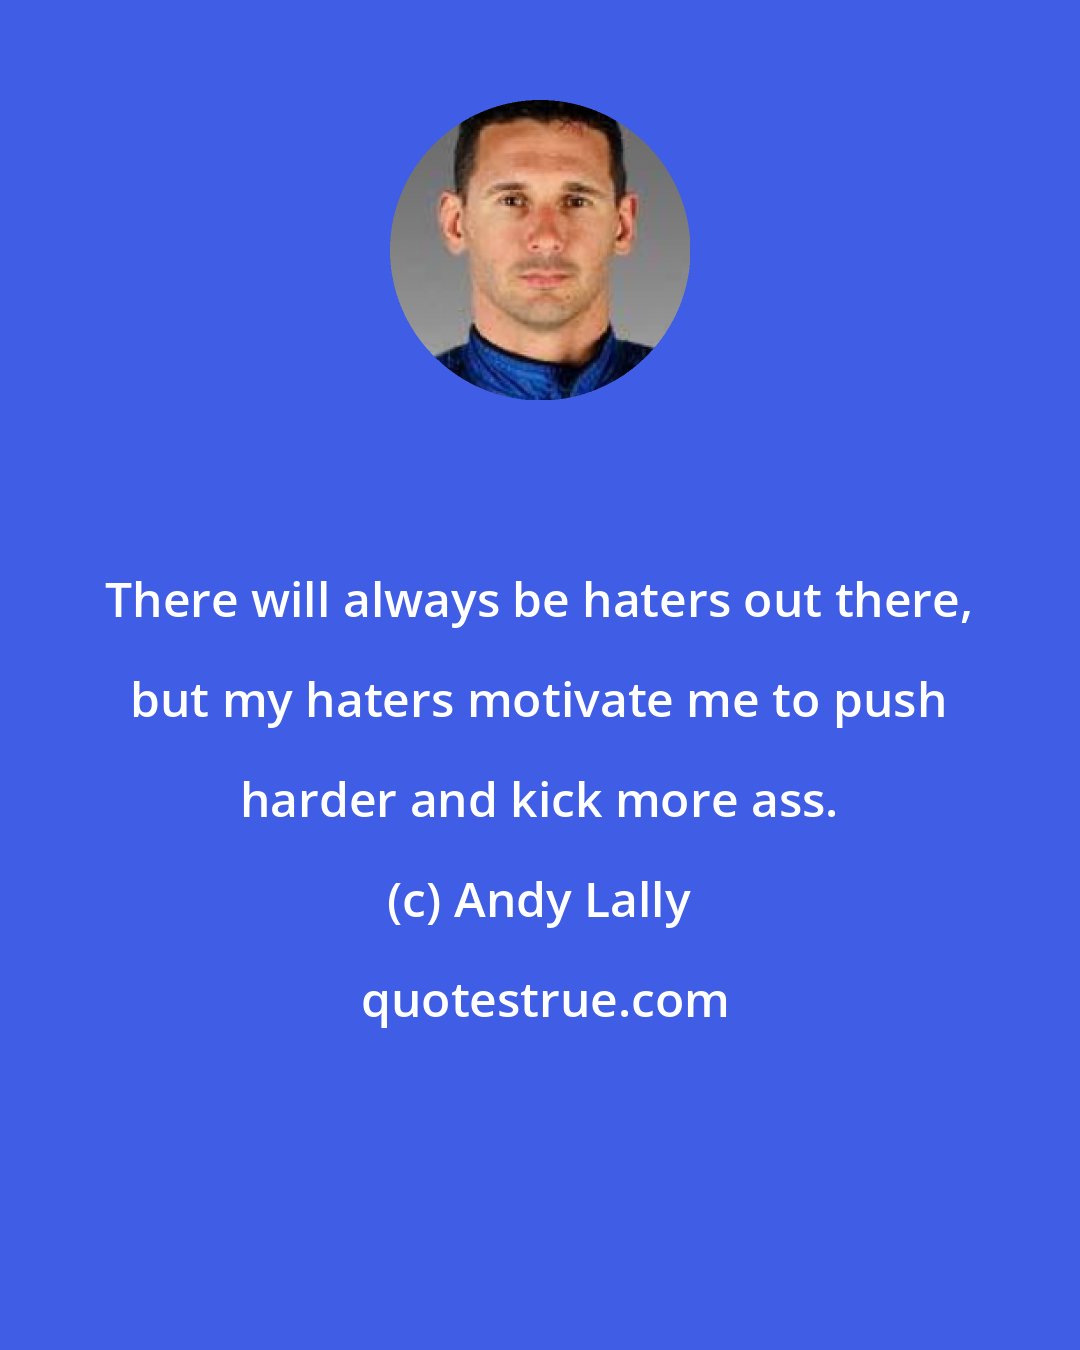 Andy Lally: There will always be haters out there, but my haters motivate me to push harder and kick more ass.